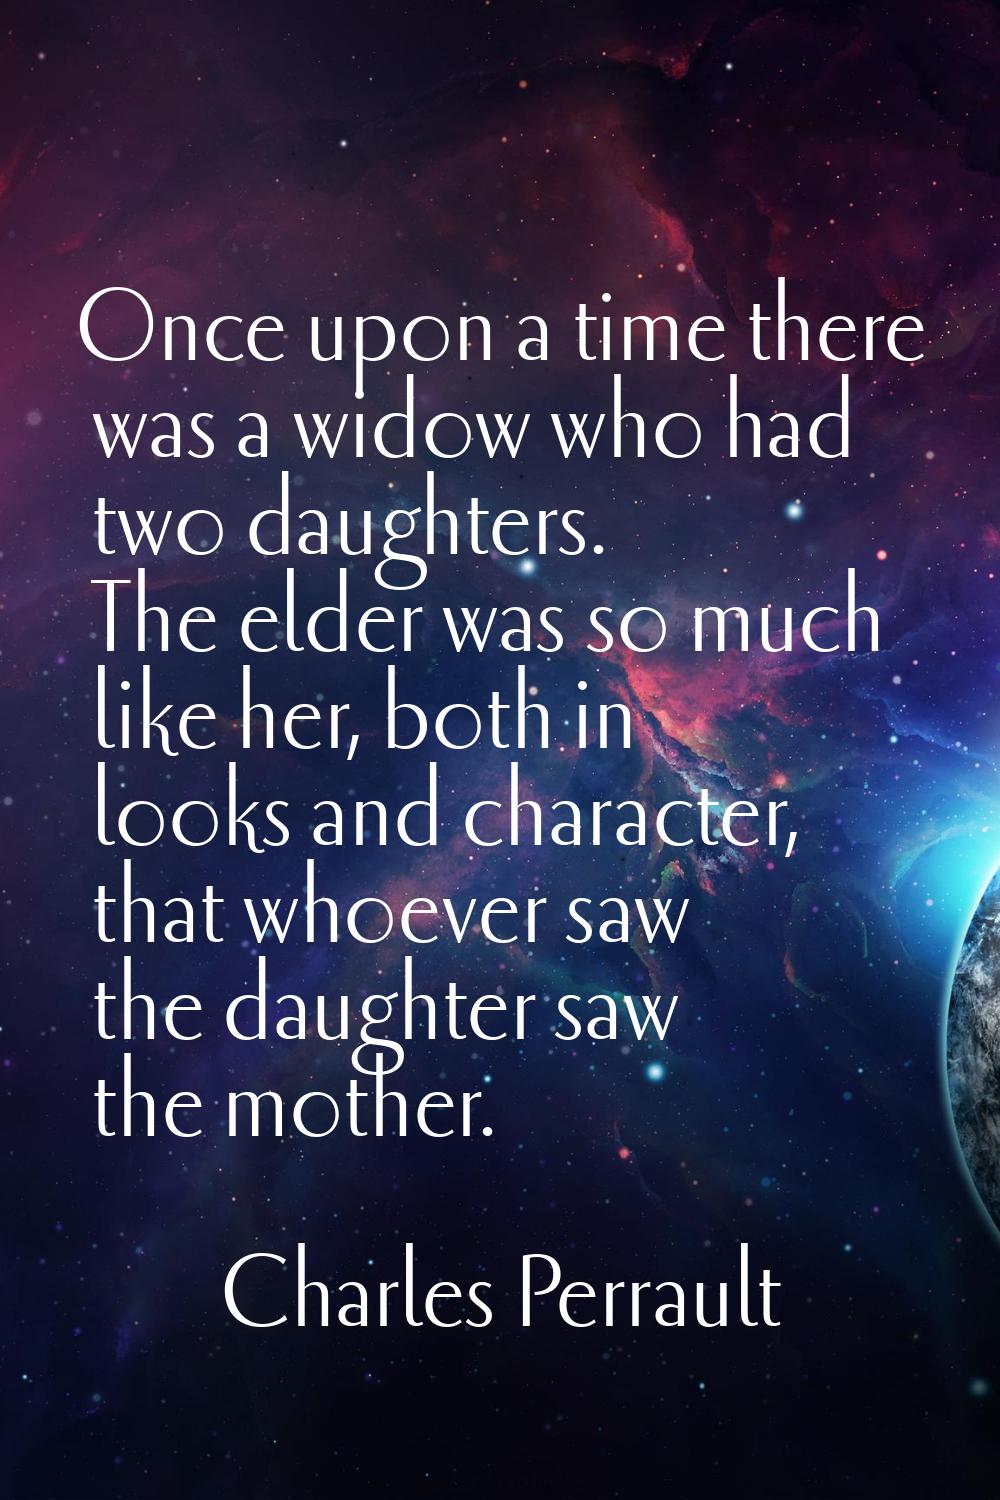 Once upon a time there was a widow who had two daughters. The elder was so much like her, both in l